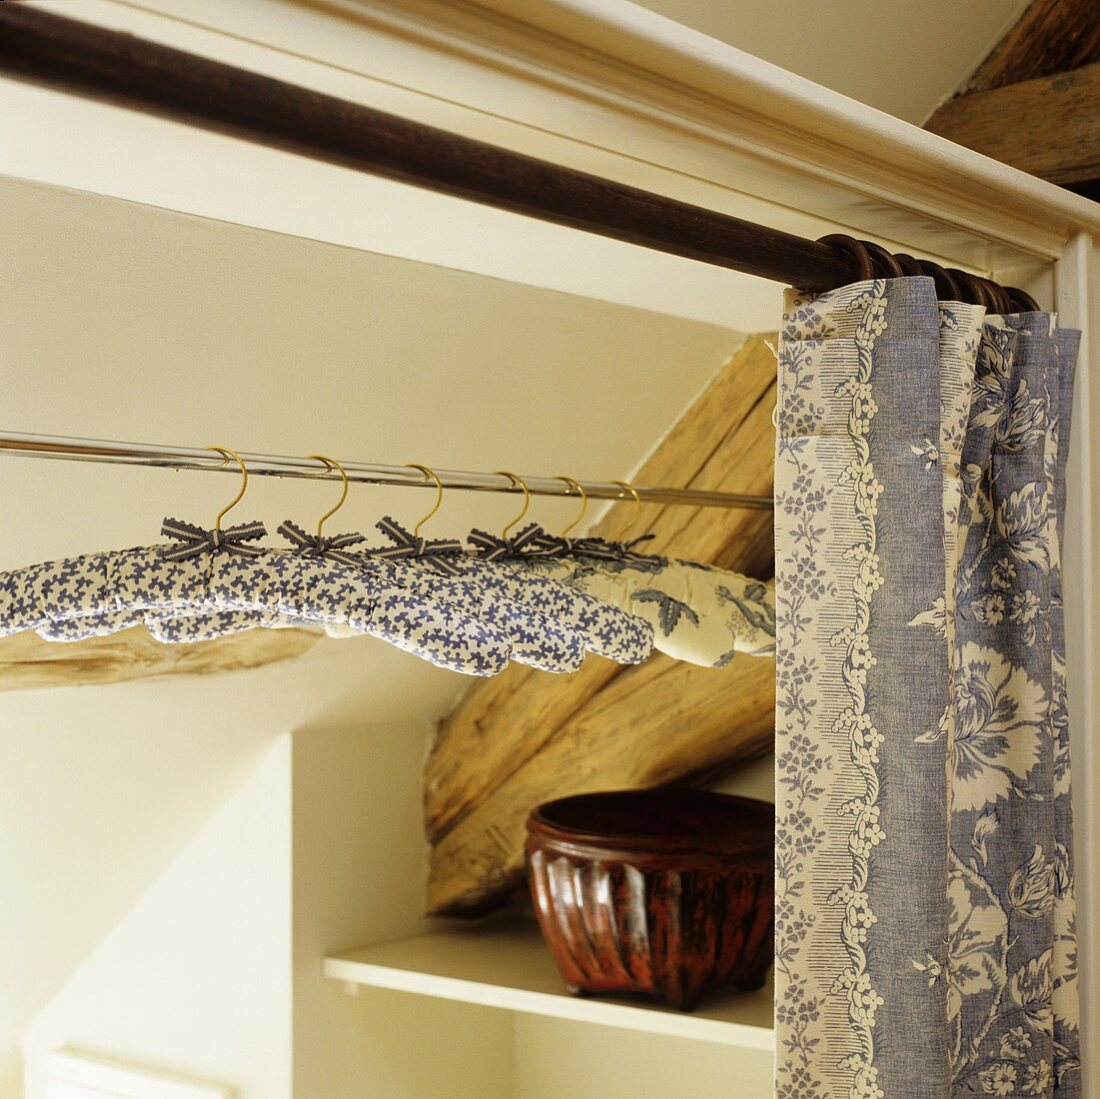 Fabric-covered hangers in a wardrobe